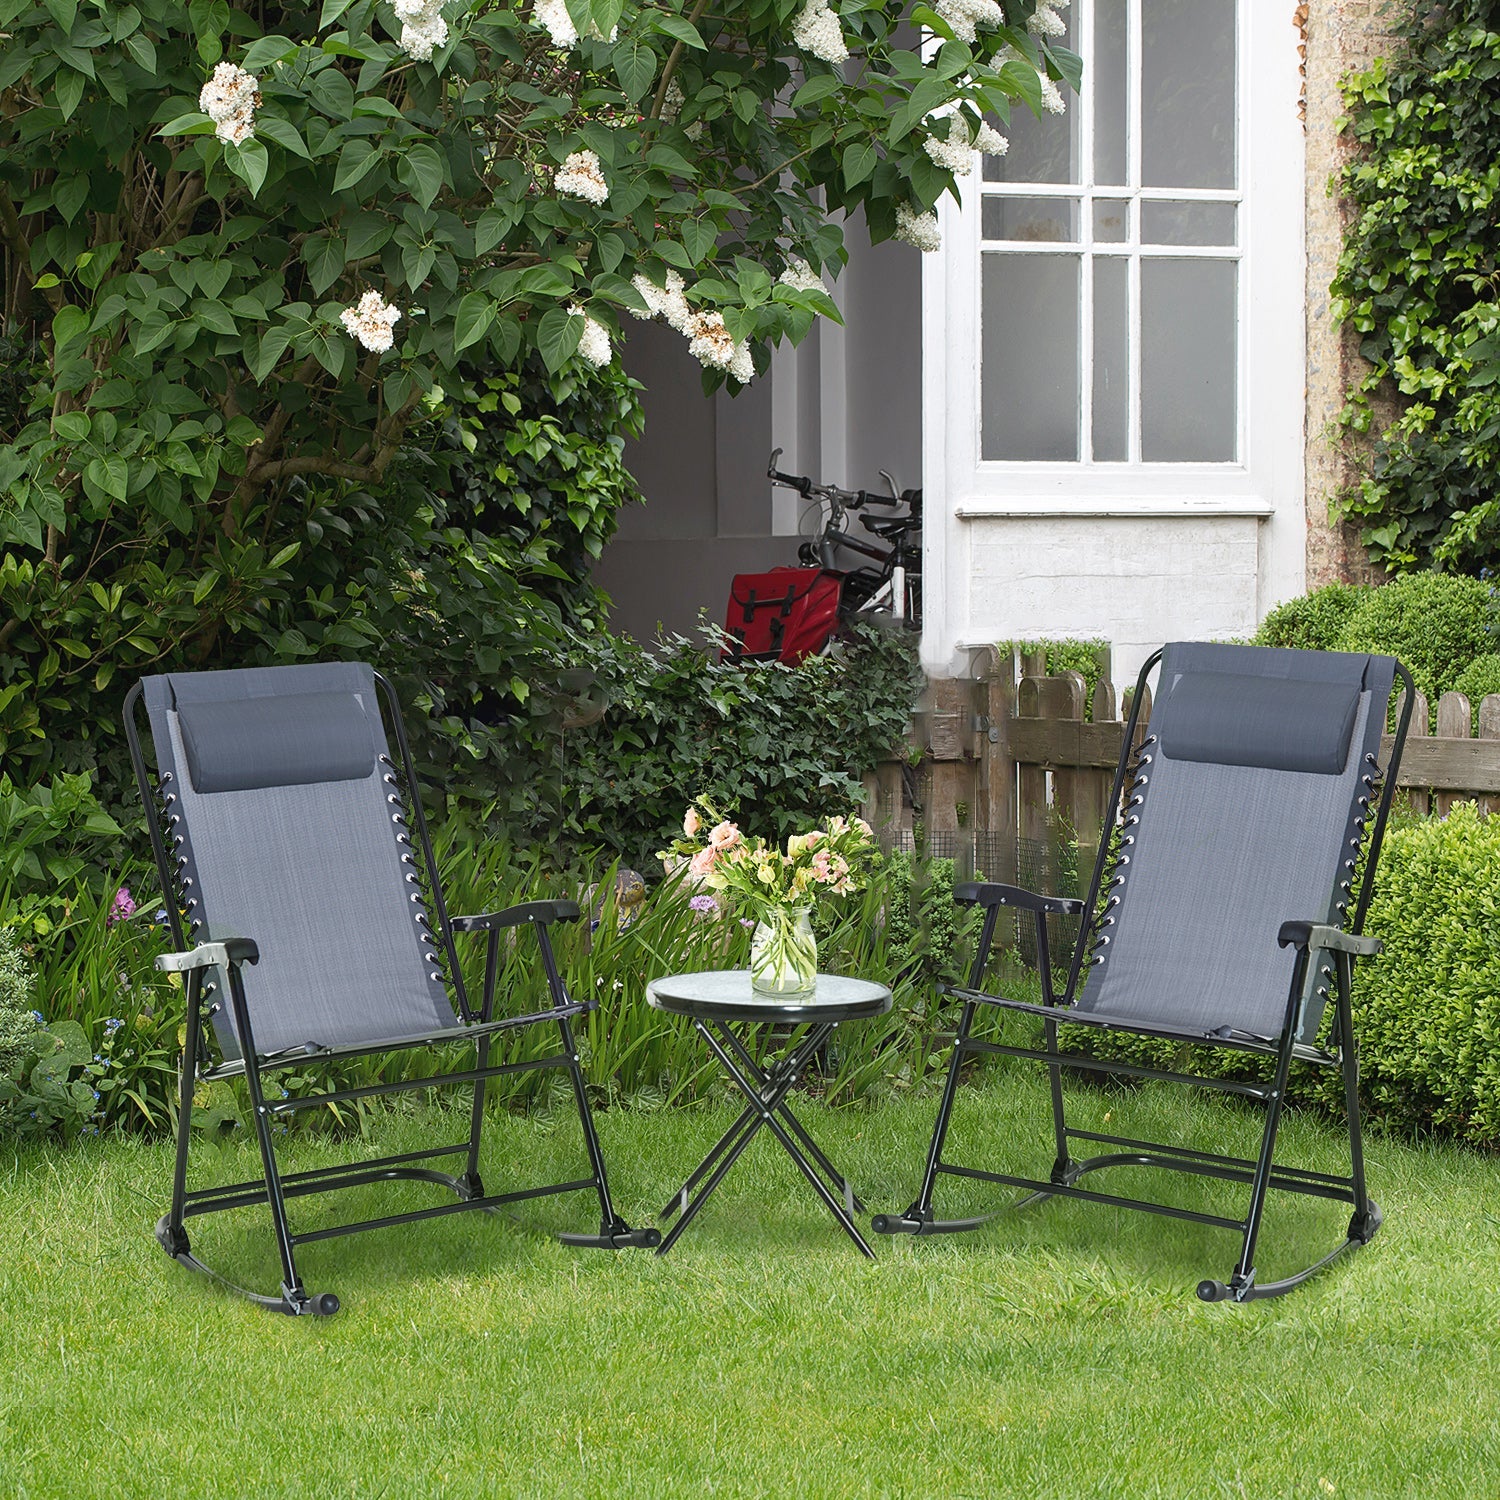 3 Piece Outdoor Rocking Set with 2 Folding Chairs and 1 Tempered Glass Table, Patio Bistro Set for Garden, Deck, Grey-1